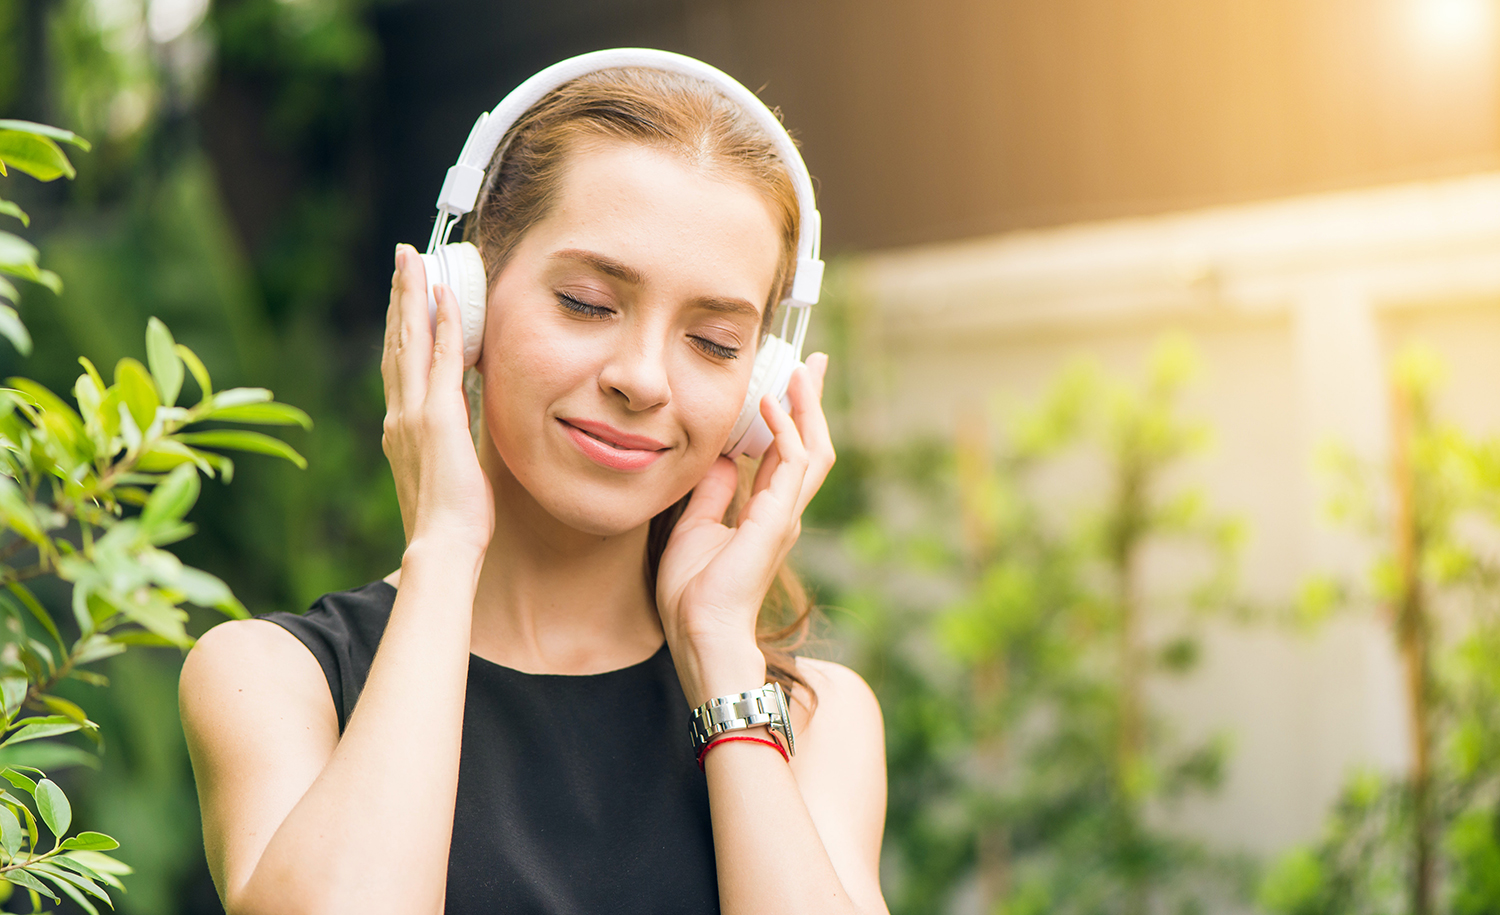 A highly sensitive person listens to an ASMR audio clip on headphones